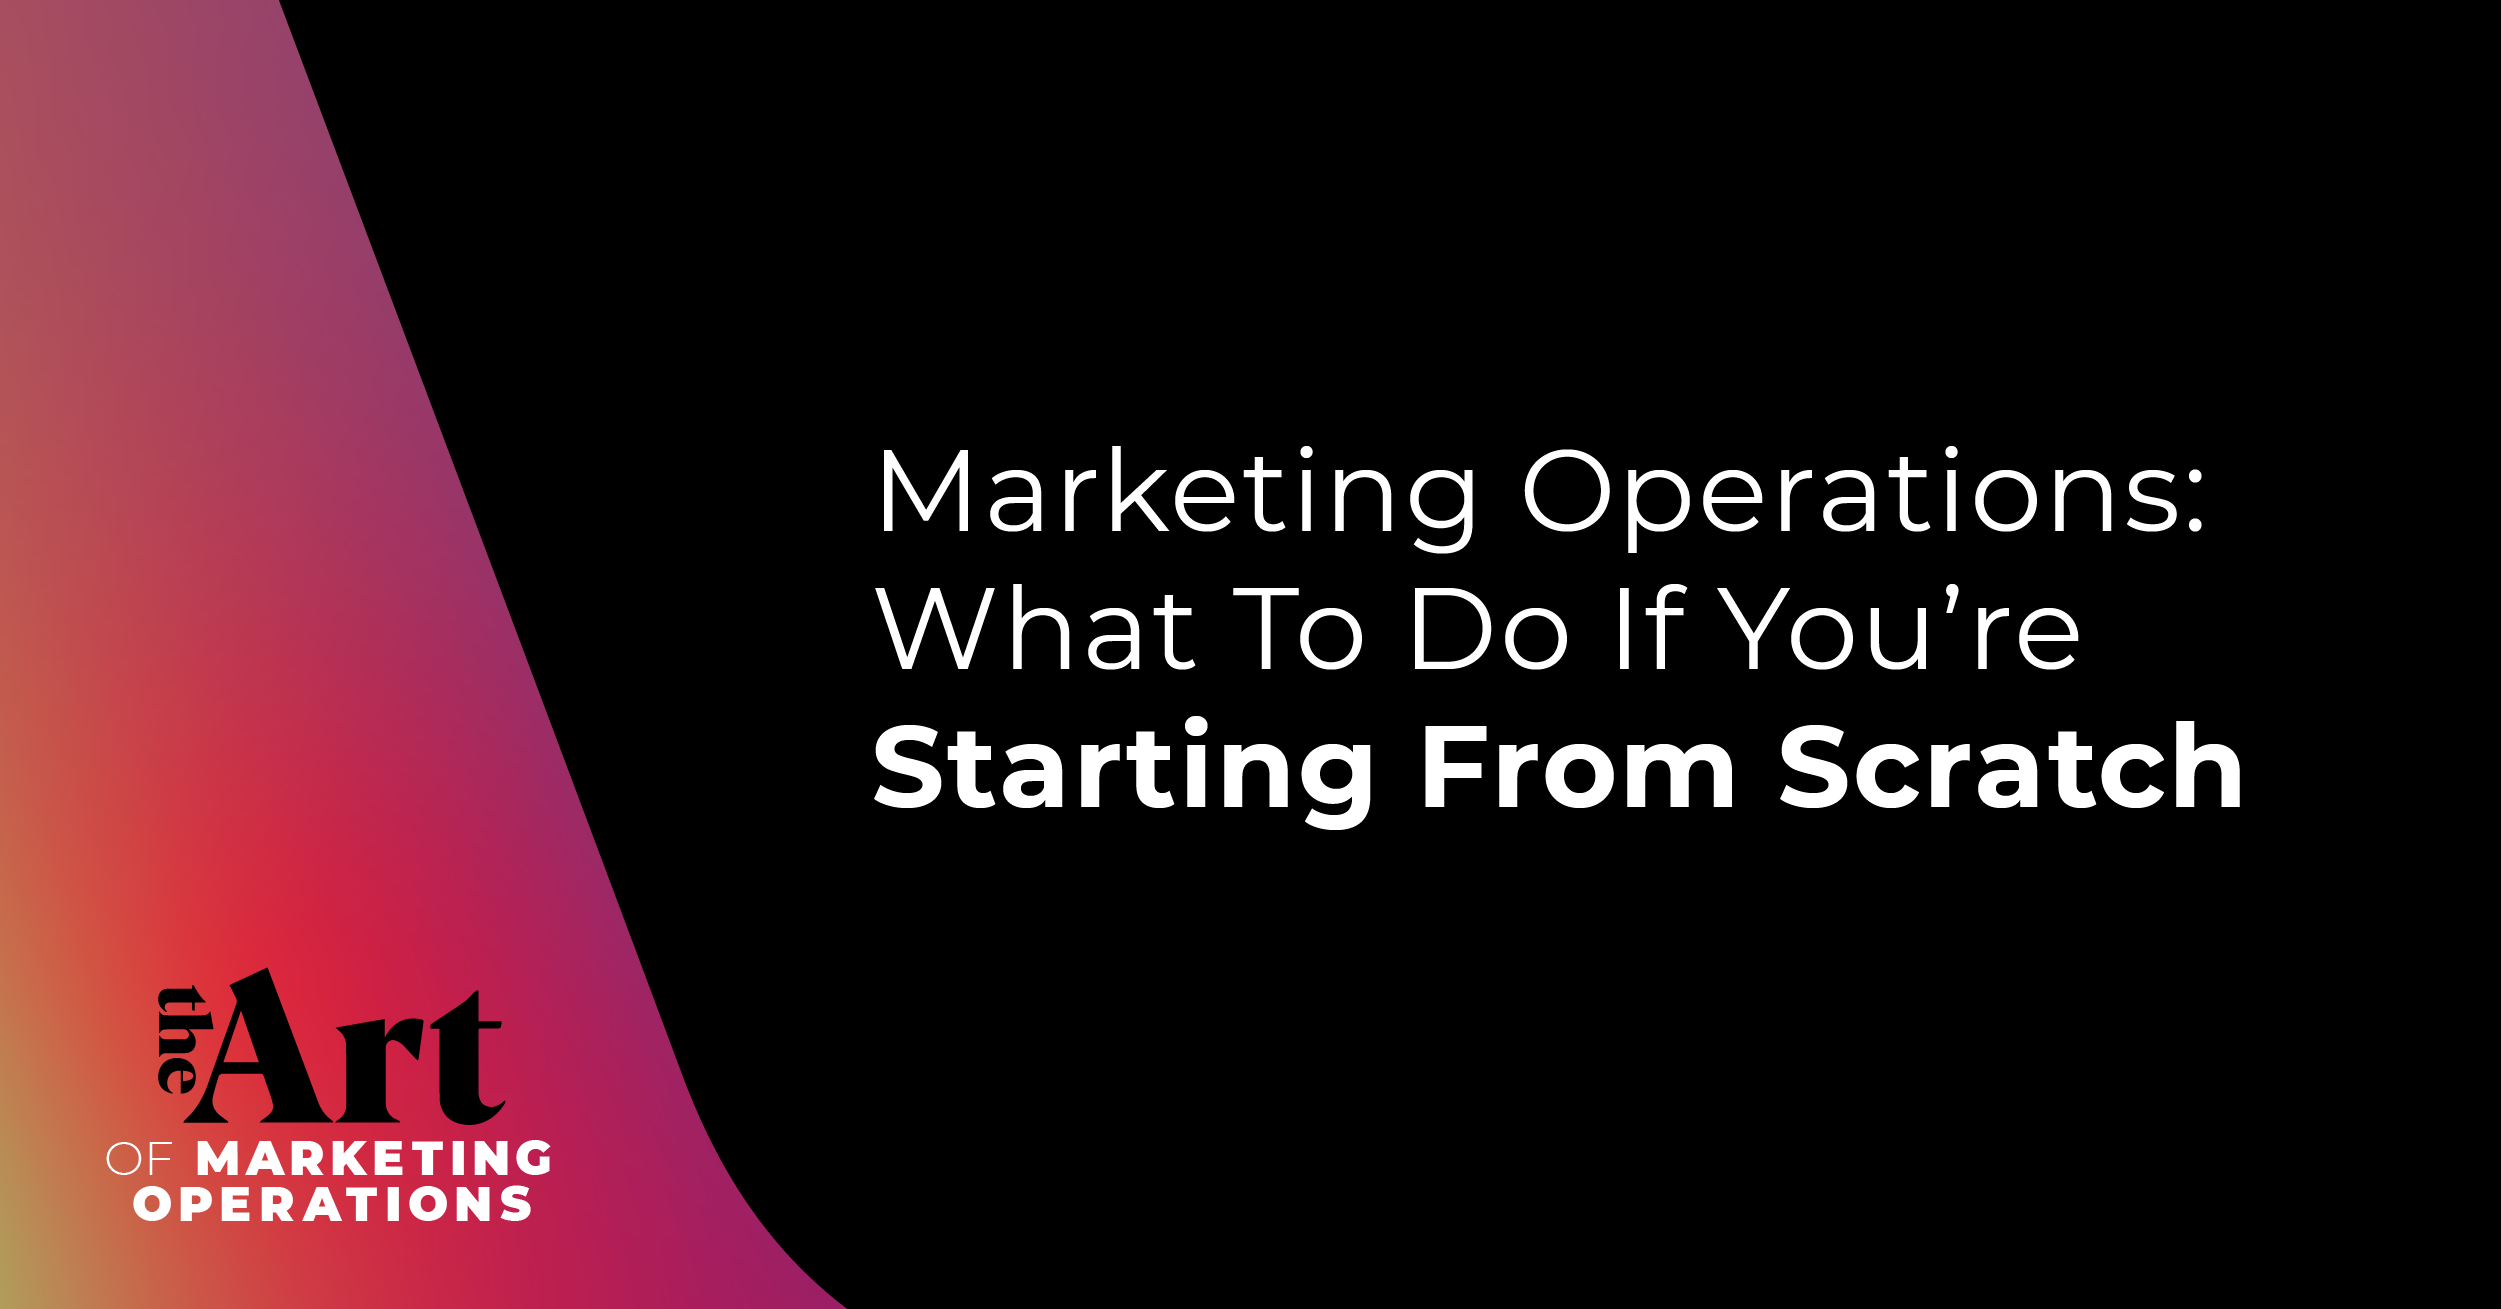 Marketing Operations: What To Do If You’re Starting From Scratch